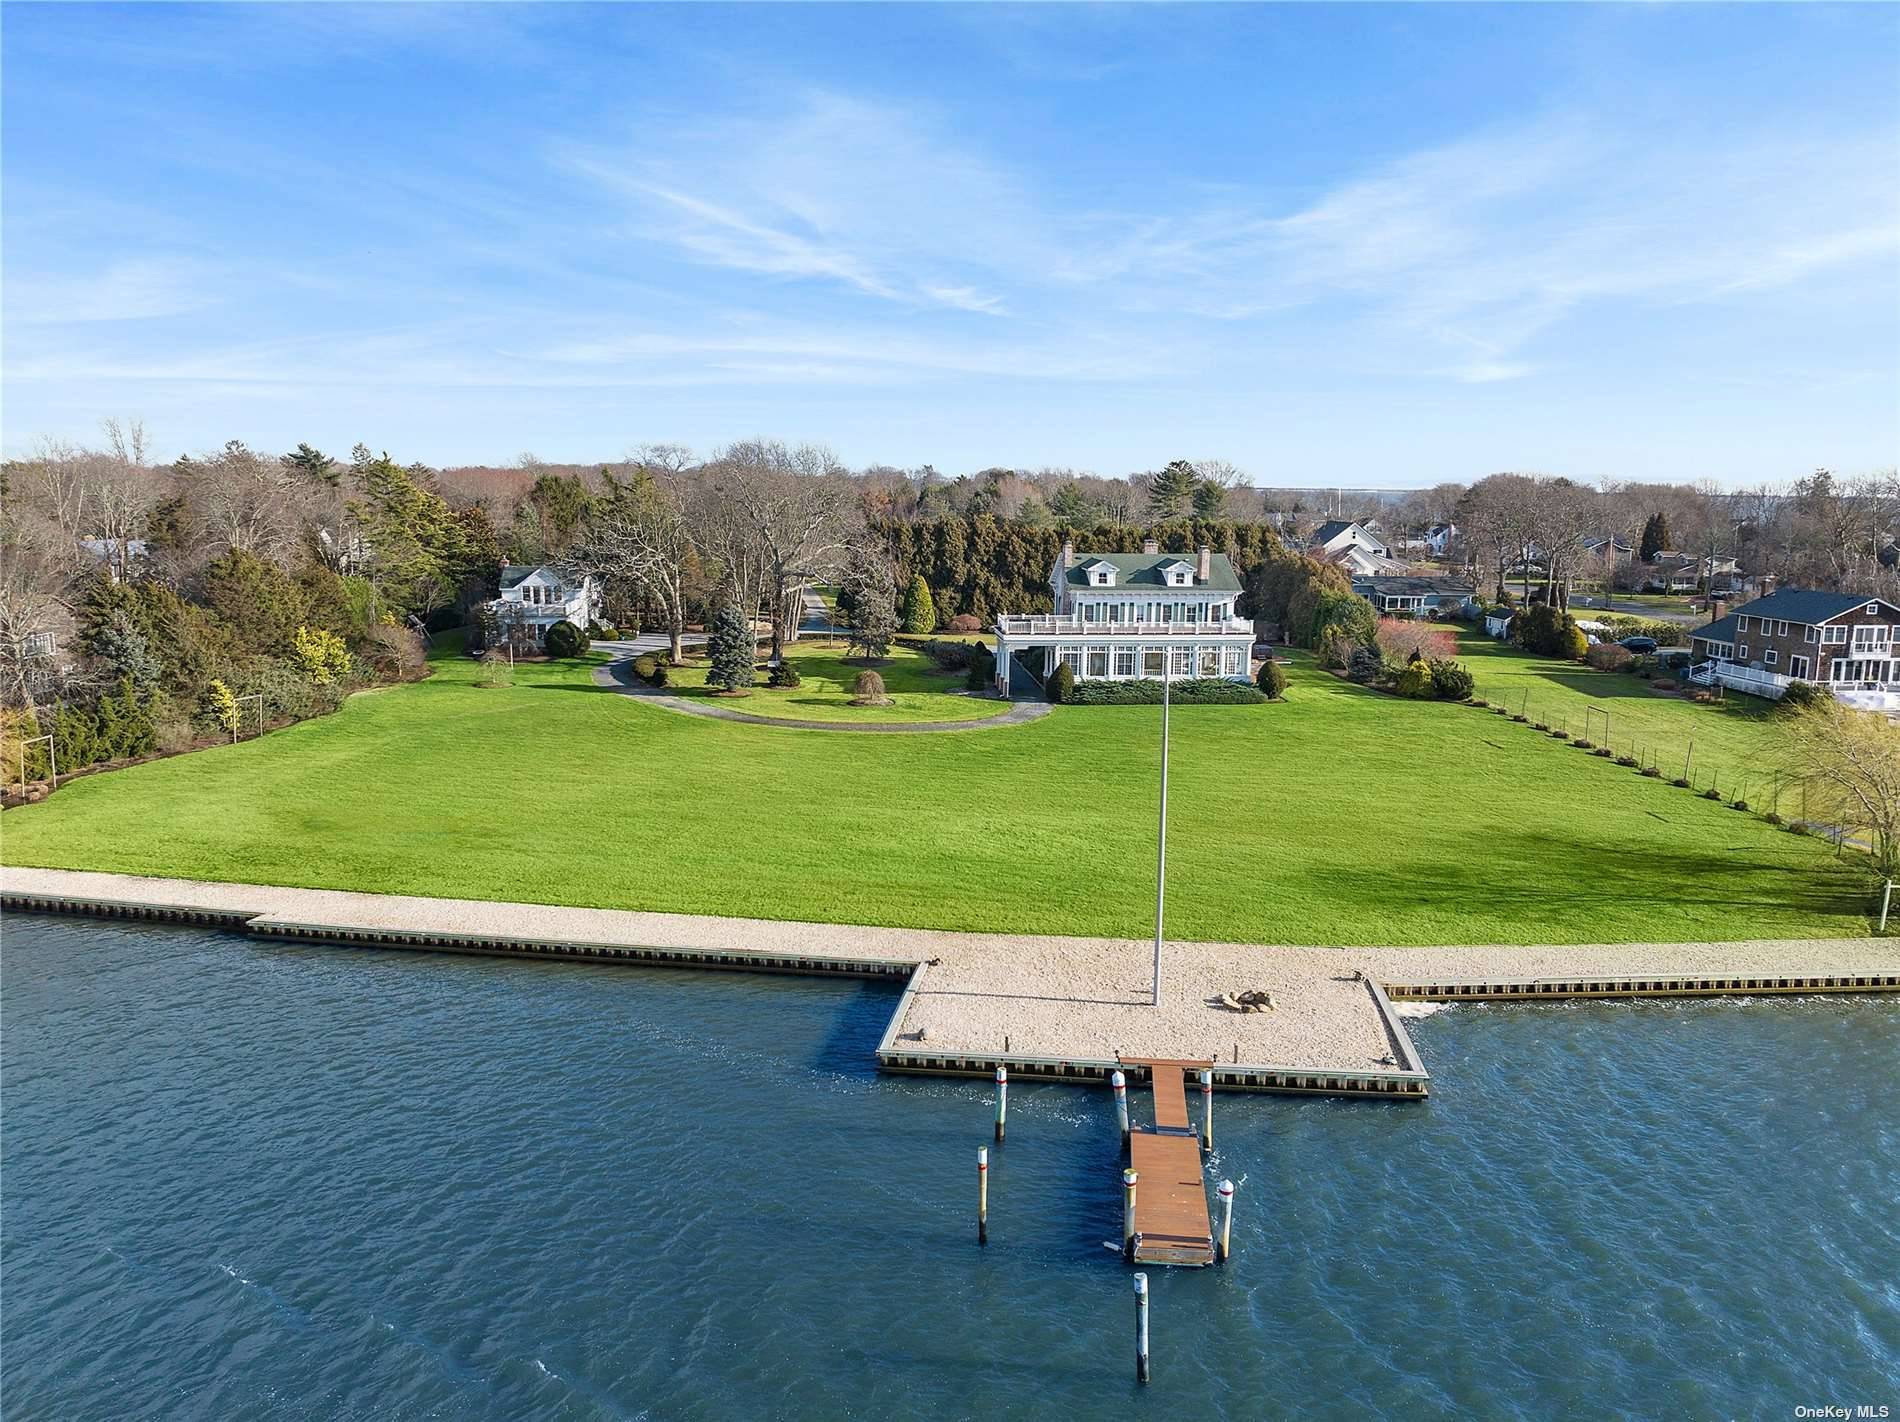 Elegance Meets Modern Comfort in This Waterfront Compound Estate Elegance meets modern comfort at this waterfront compound, Discover a glimpse into another era at this rare western facing waterfront estate ...